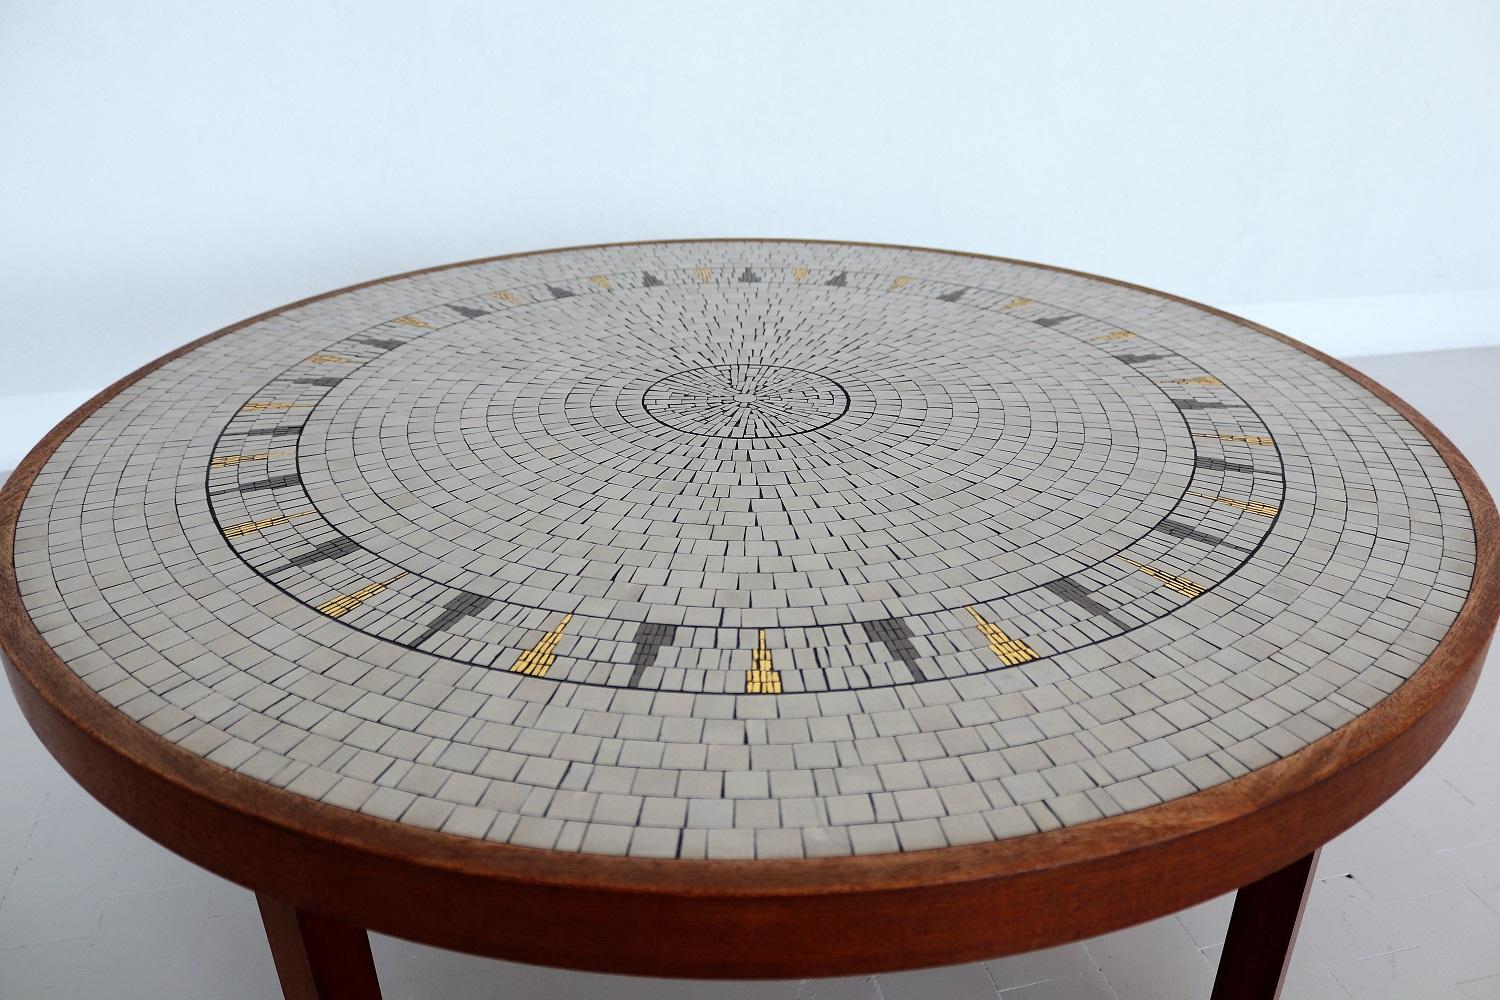 Gorgeous coffee table with big mosaic plate with white-off, grey and golden tiles on strong teak table base.
The golden tiles are shining beautifully in the light!
Made in Germany in the 1960s by Berthold Müller, Oerlighausen.
The mosaic as well as